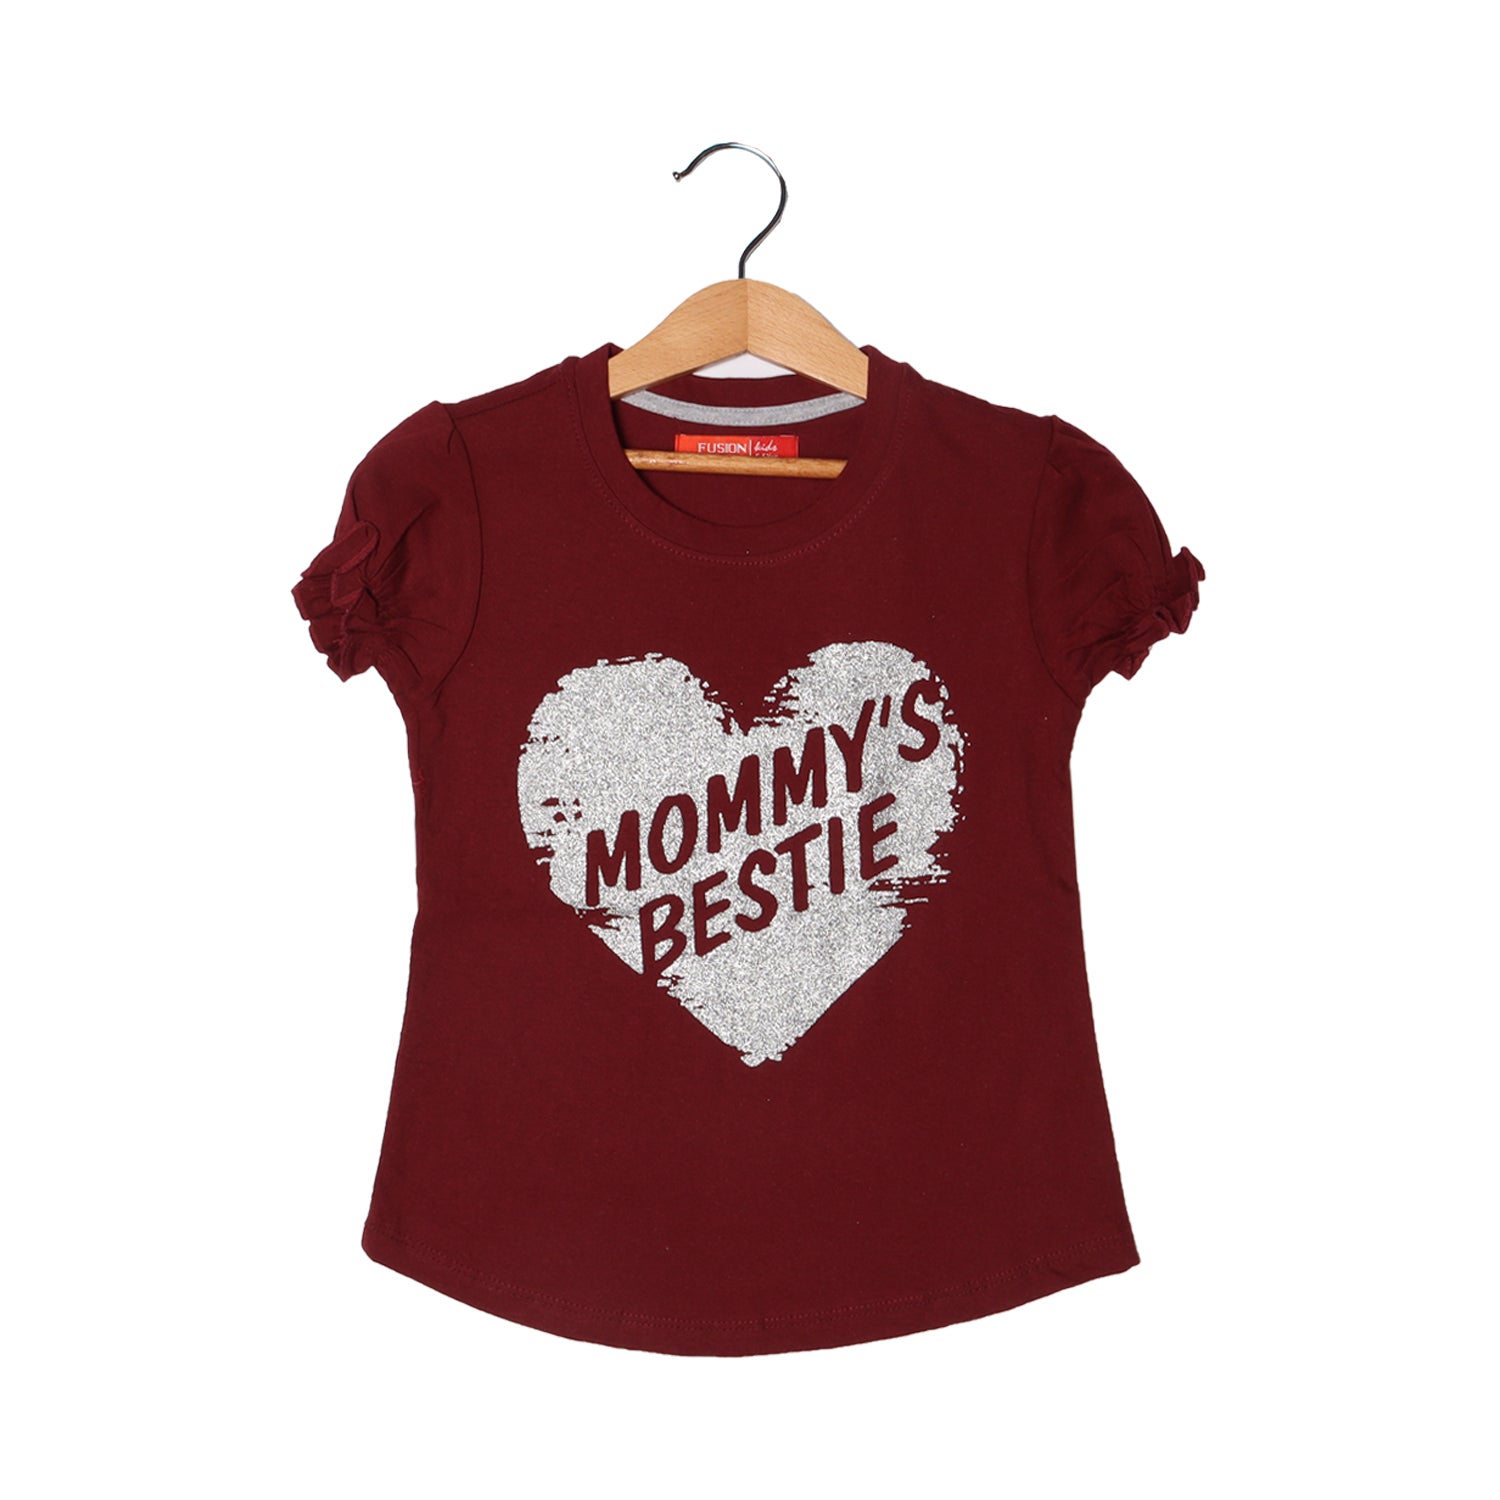 MAROON MOMMY'S BESTIE PRINTED T-SHIRT FOR GIRLS